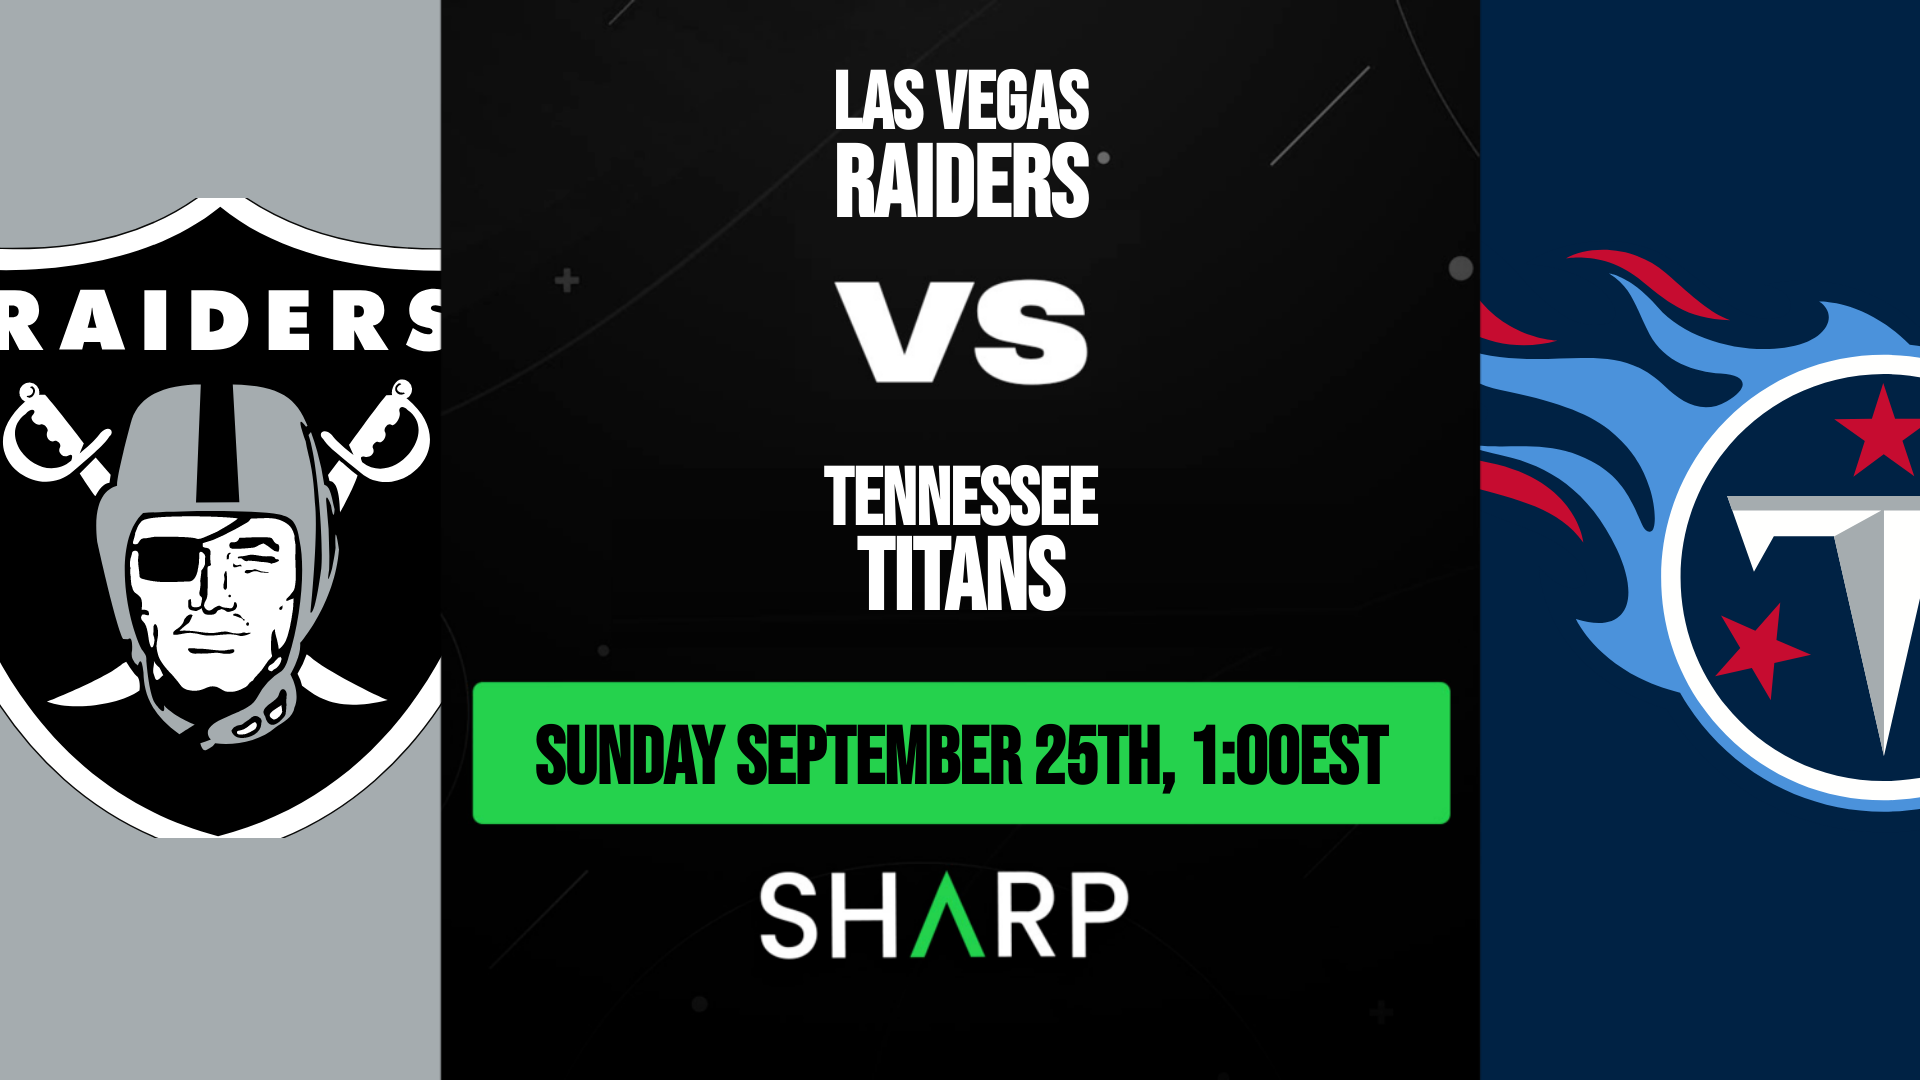 Las Vegas Raiders vs Tennessee Titans Matchup Preview - September 25th, 2022